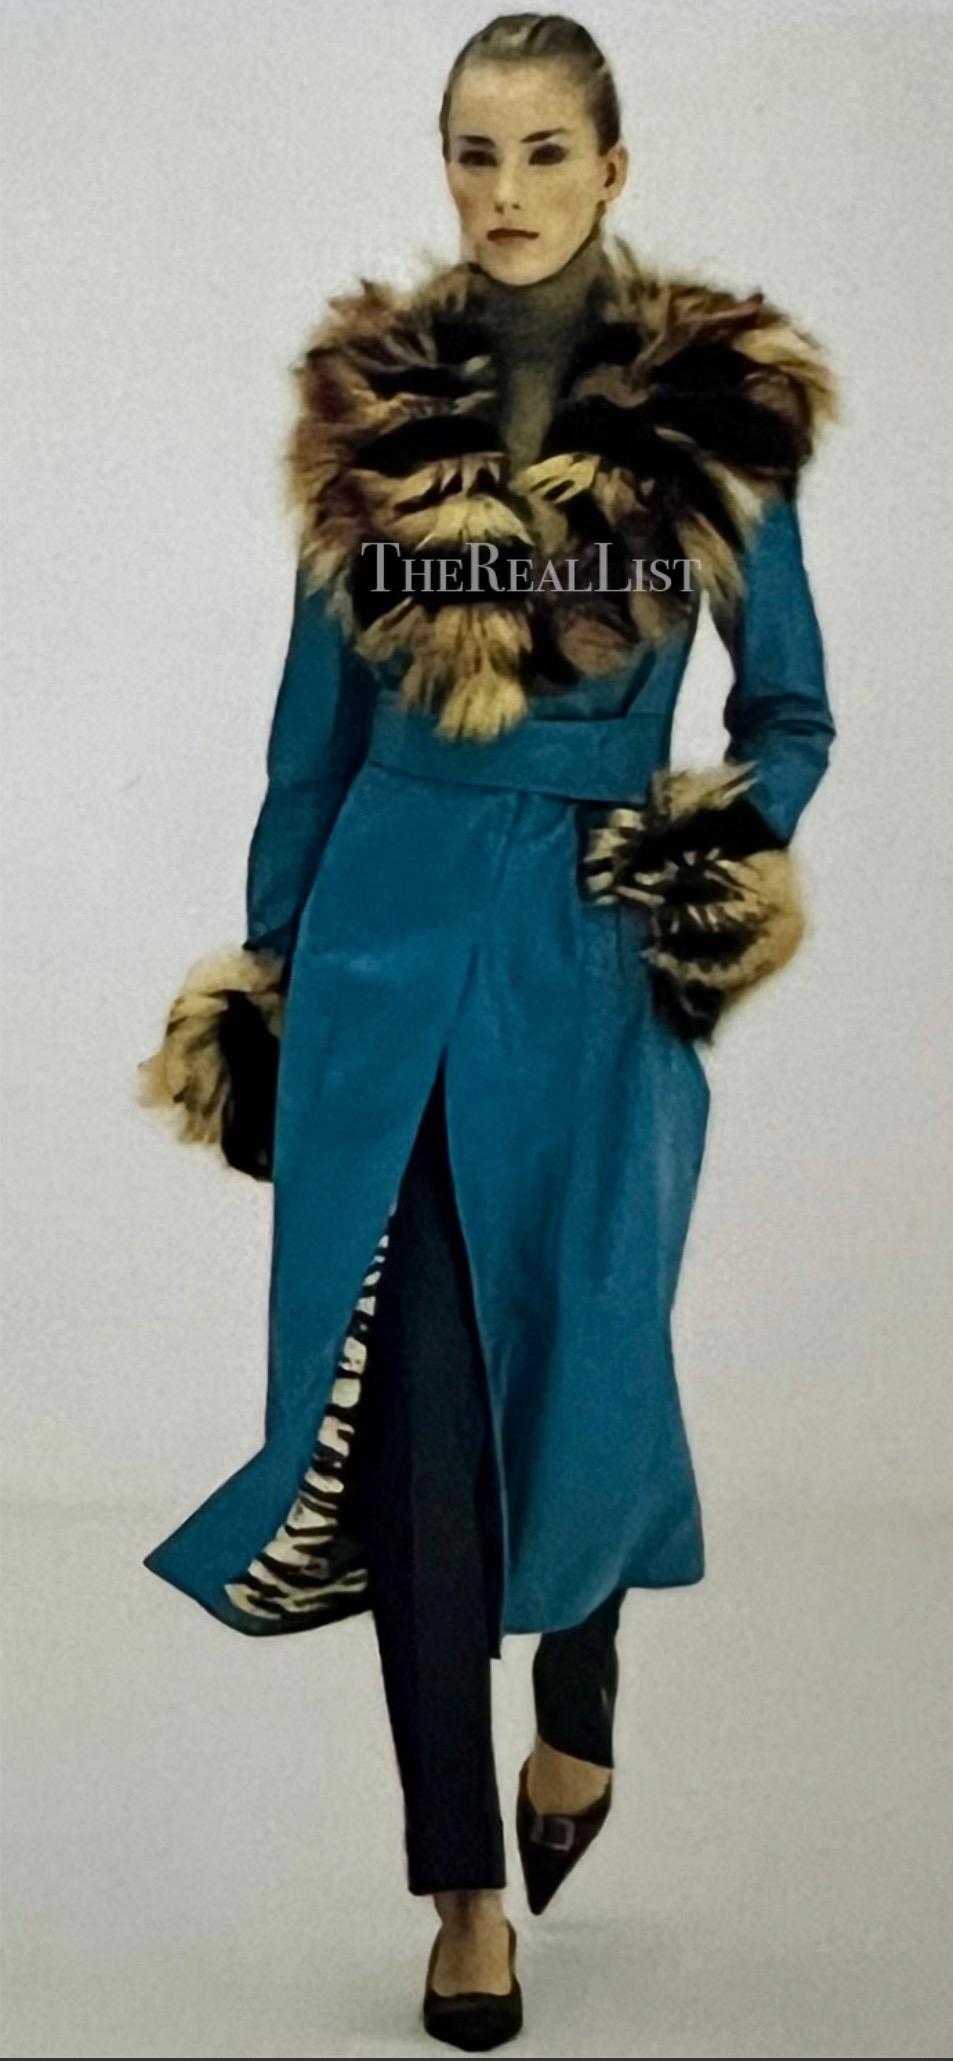 Presenting a stunning blue leather Dolce & Gabbana trench coat. From the Fall/Winter 2001 collection, this coat made its runway debut as part of look 44. Constructed of bright blue leather, this coat is accented with black and orange striped fox fur